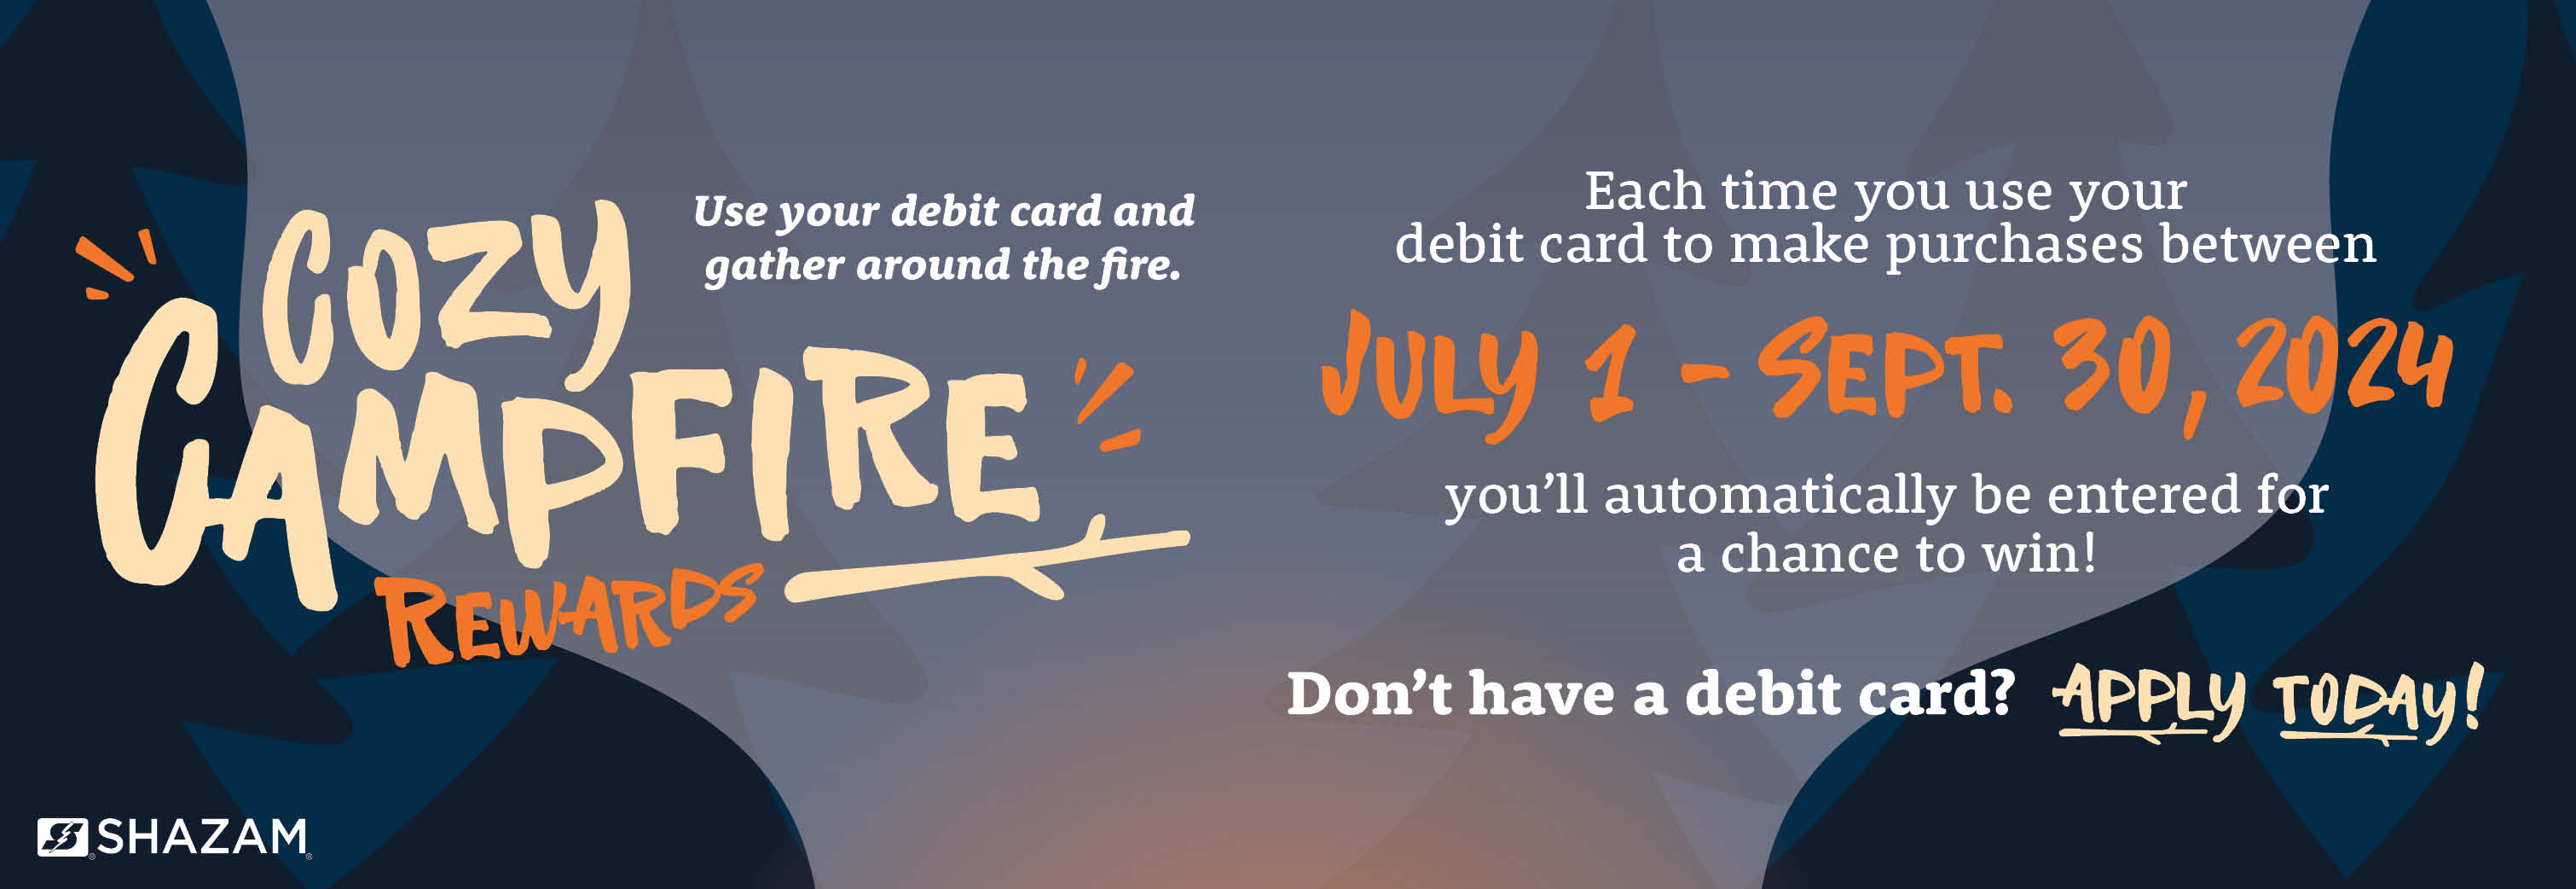 Cozy campfire rewards! Use your debit card and gather around the fire. Each time you use your debit card to make purchases between July 1 and September 30, 2024 you're automatically entered for a chance to win! Don't have a debit card? Apply today!